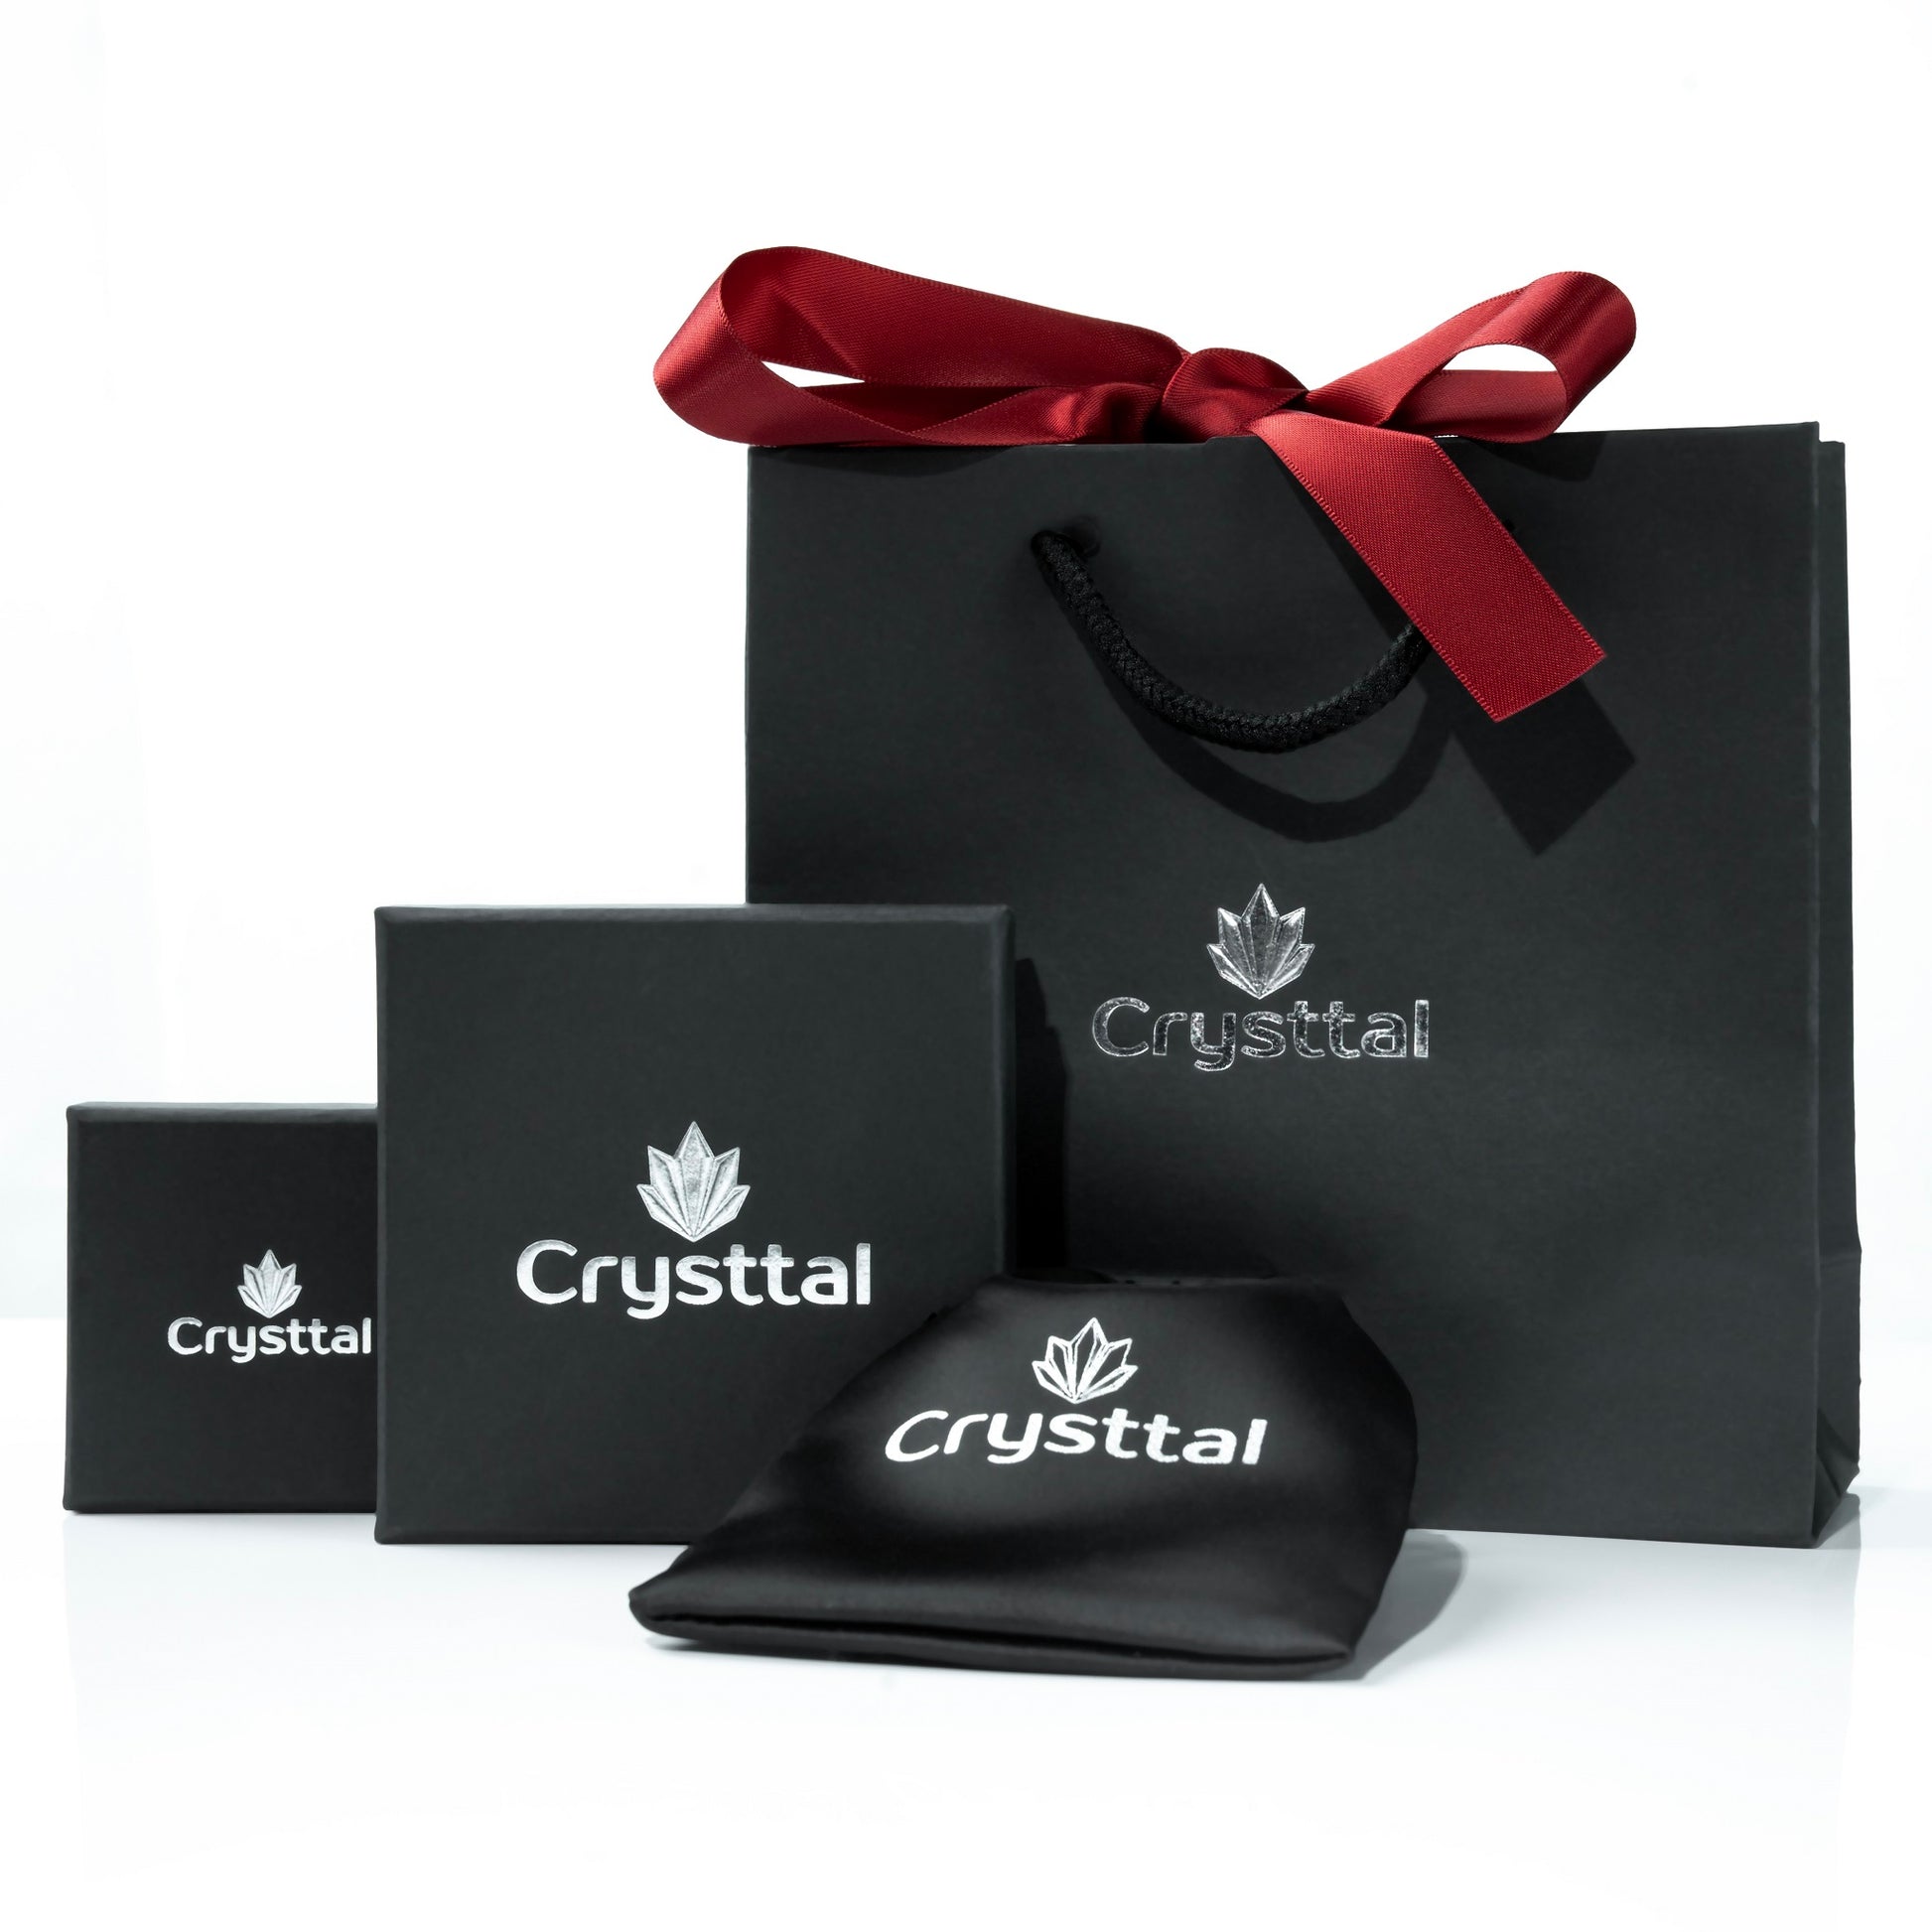 Our Crysttal branded gift packaging including Ring box, Necklace box, storage pouch and Gift bag with tie bow ribbon